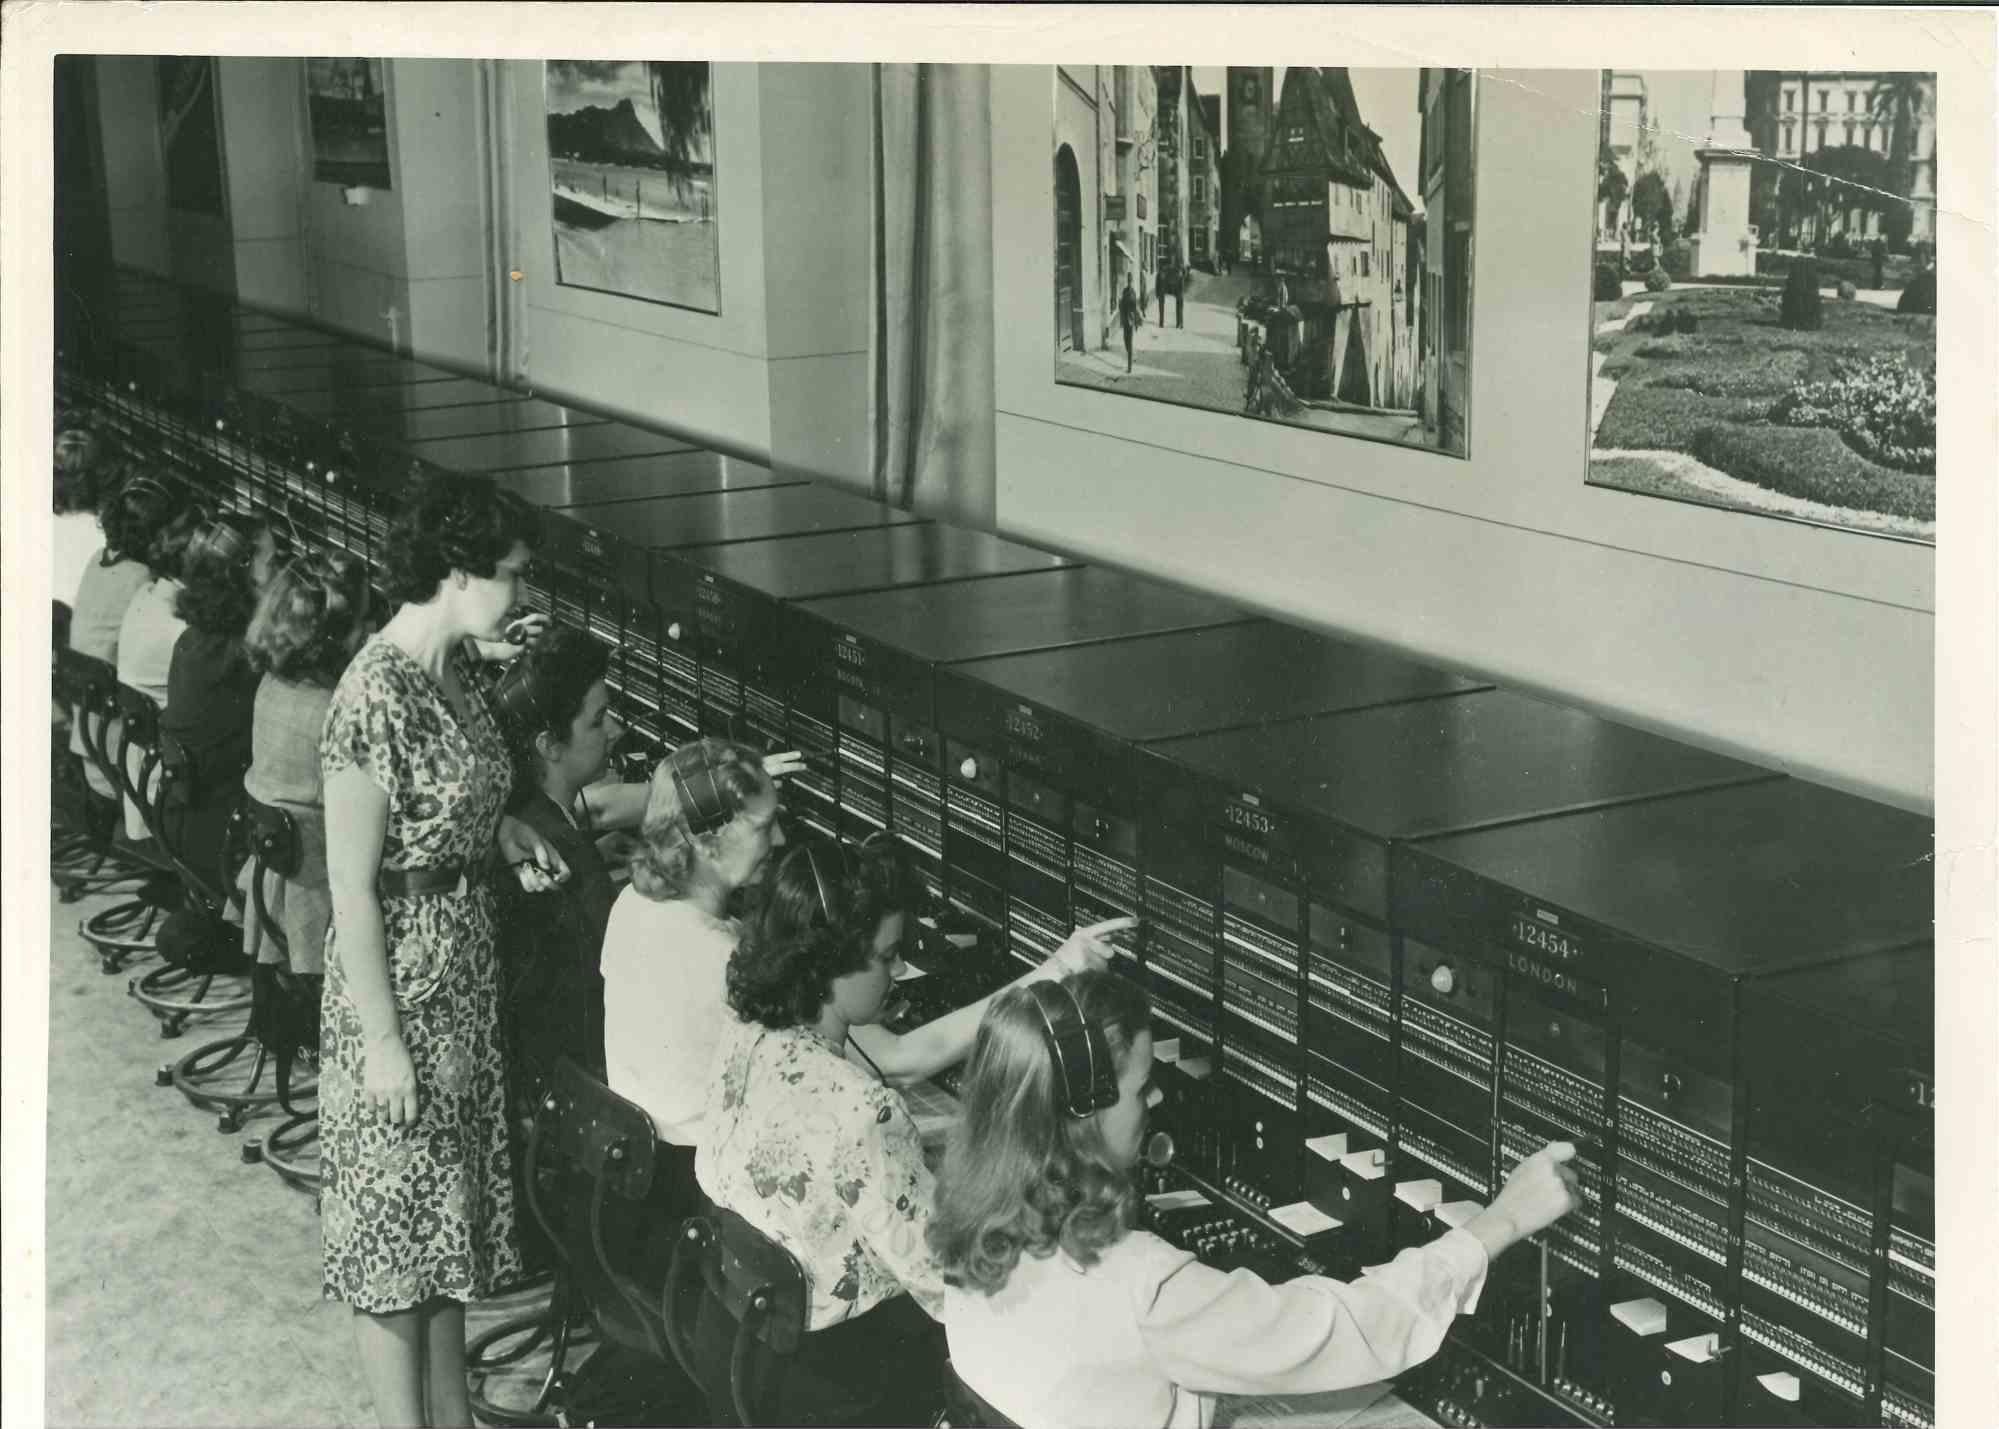 Unknown Figurative Photograph - U.S. Telephone System - Vintage Photograph - Mid 20th Century